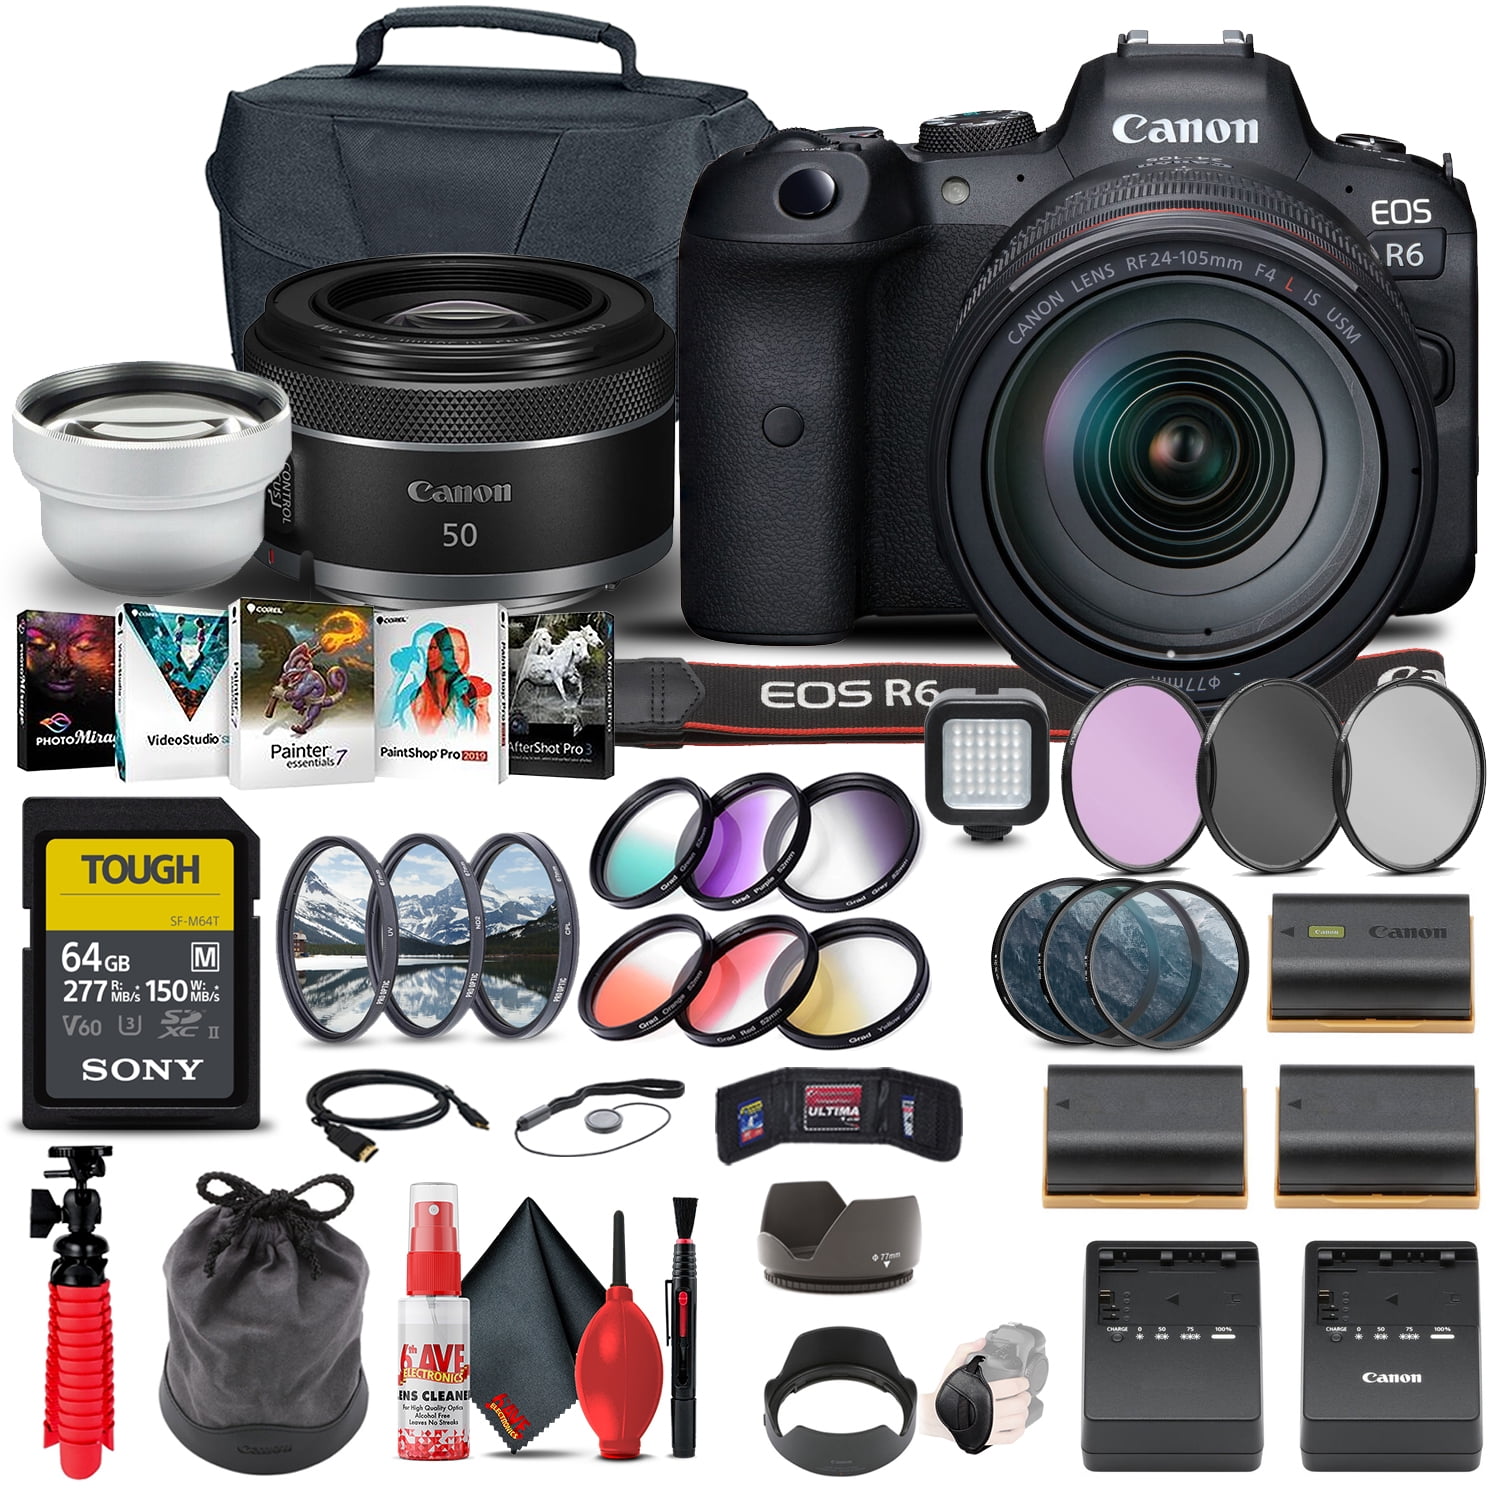  Canon EOS 6D Mark II DSLR Camera with 24-105mm f/4L II Lens  (1897C009) + 64GB Memory Card + Color Filter Kit + Case + Filter Kit +  Corel Photo Software +